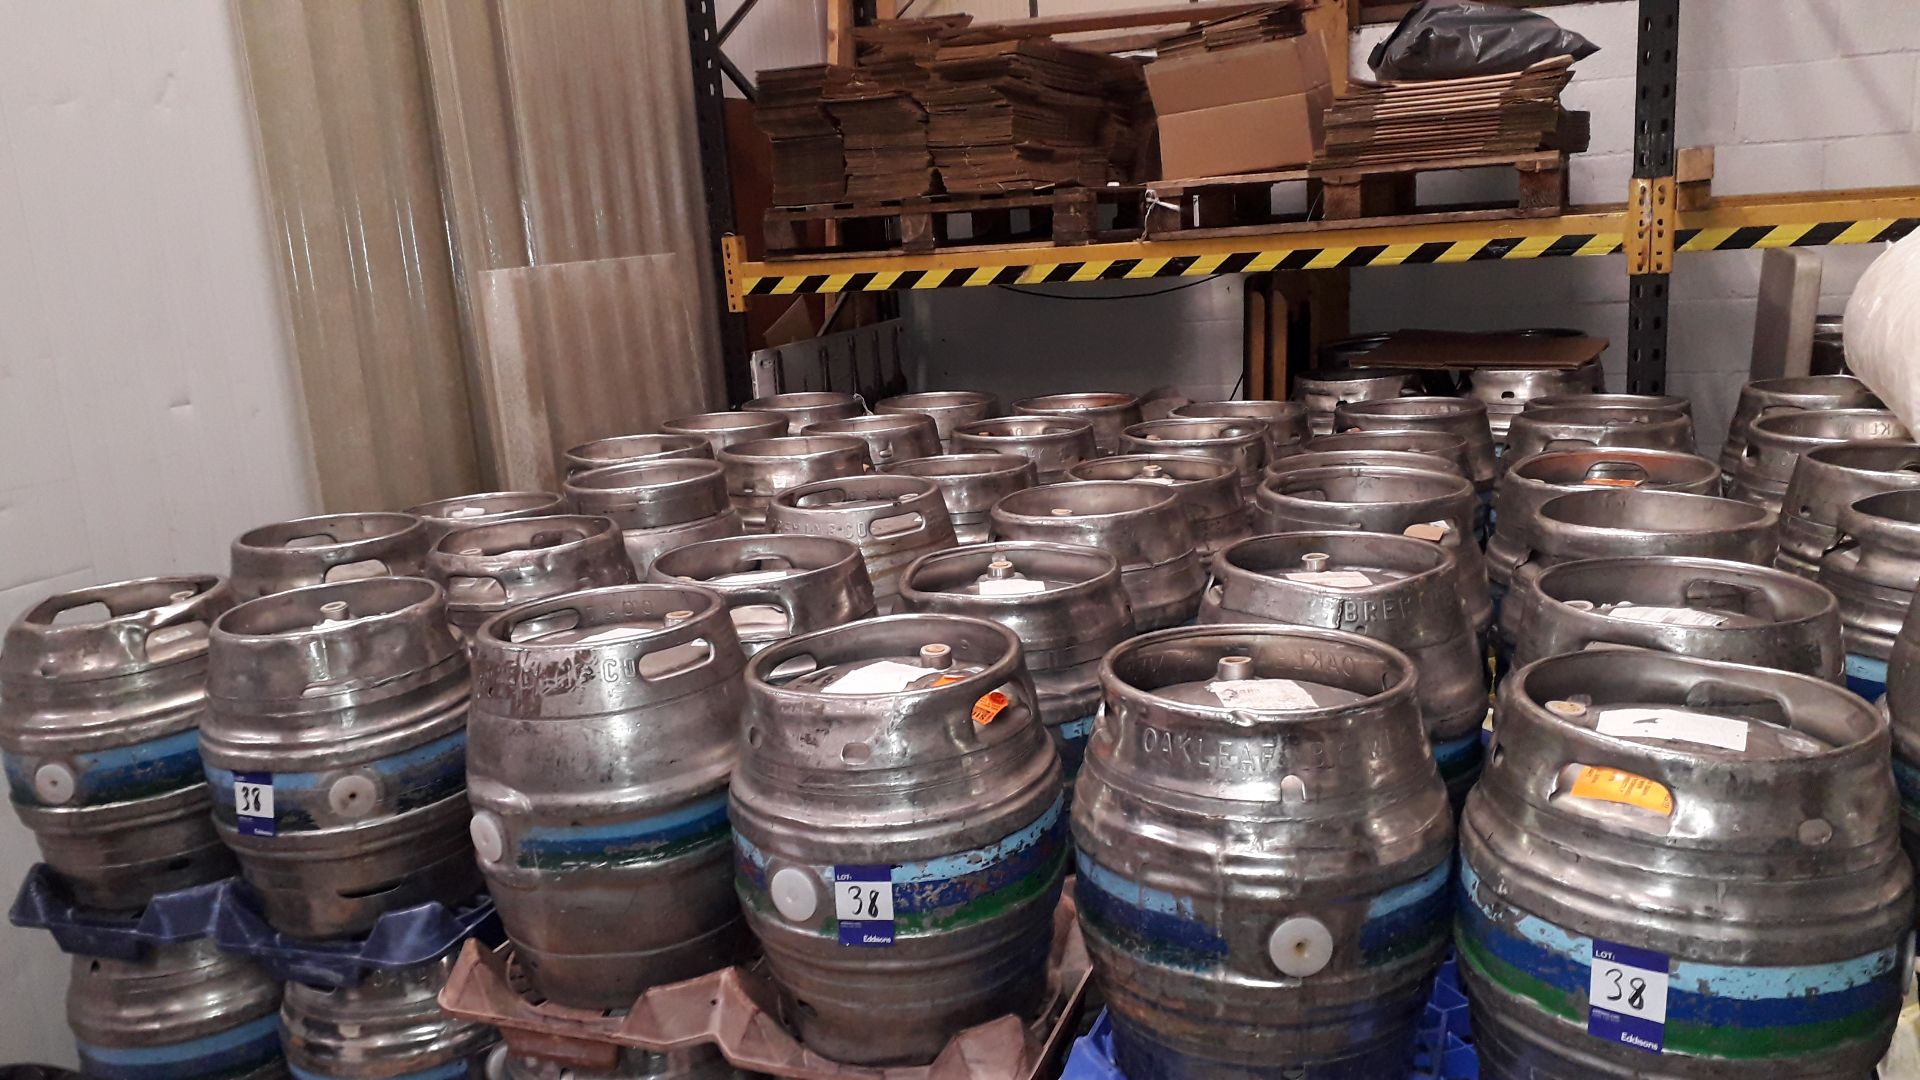 Approx. 110 x 9 Gallon Stainless Steel Beer Kegs and Quantity of Keg Pallets - Image 4 of 4